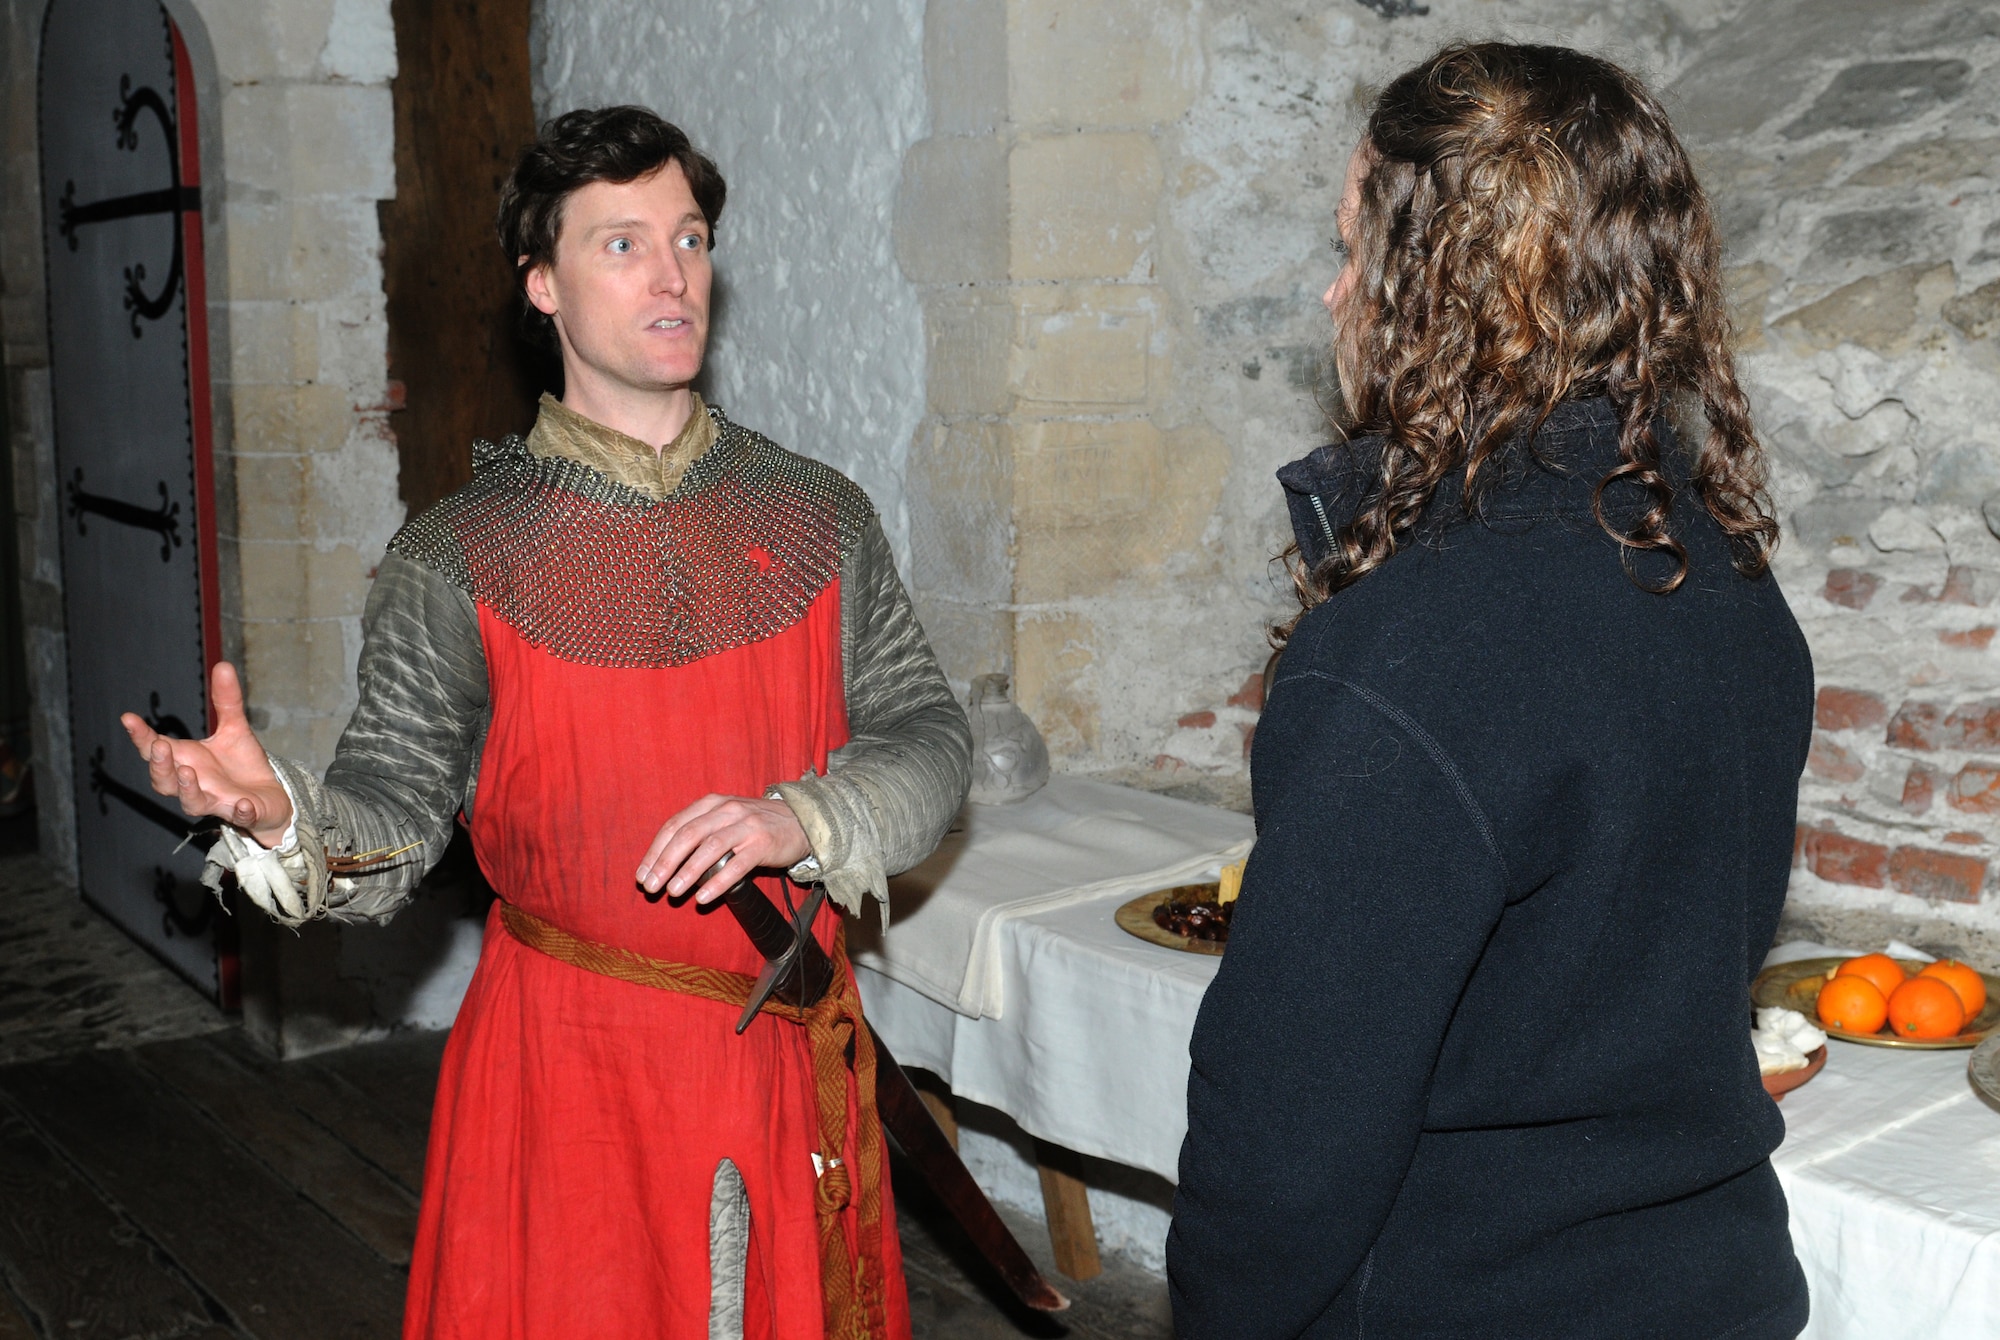 DOVER, England – One of Dover Castle’s characters speaks to an RAF Lakenheath Information Tickets and Travel trip participant in the guest dining hall inside the Great Tower on March 26, 2011. Dover Castle has a variety of characters on site to explain the castle’s history. (U.S. Air Force photo/Staff Sgt. Stephen Linch)